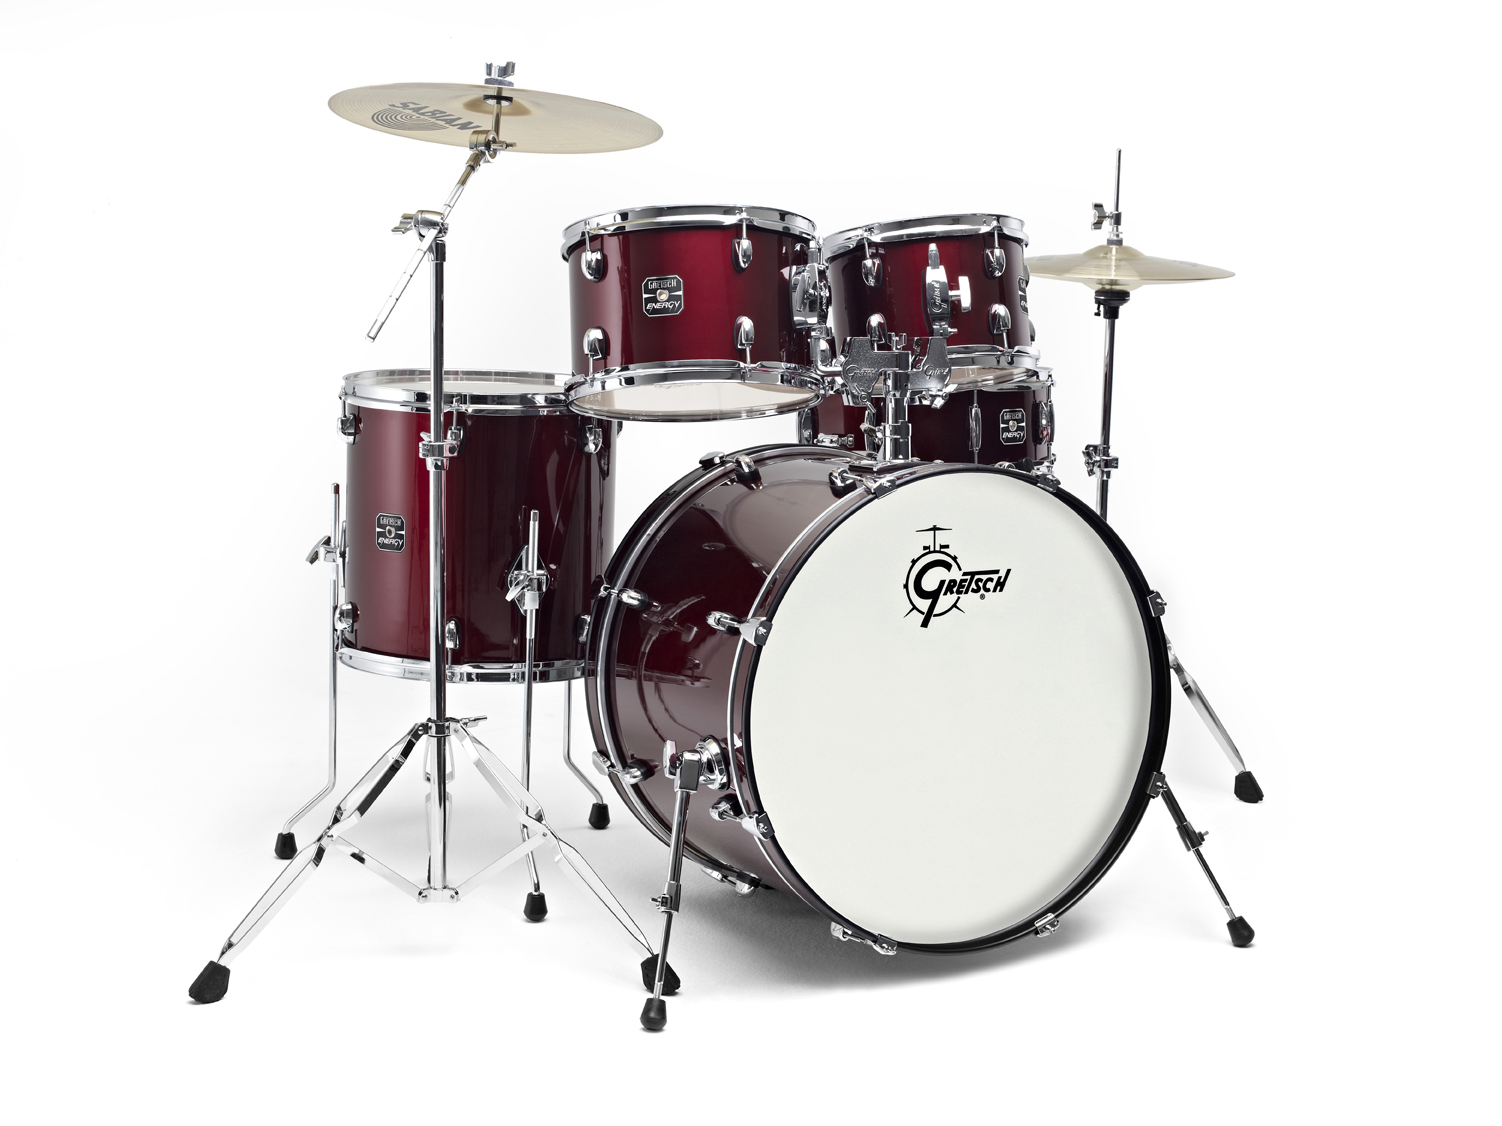 GRETSCH DRUMS NEW ENERGY FUSION 20 WINE RED + CYMBALES PAISTE 101